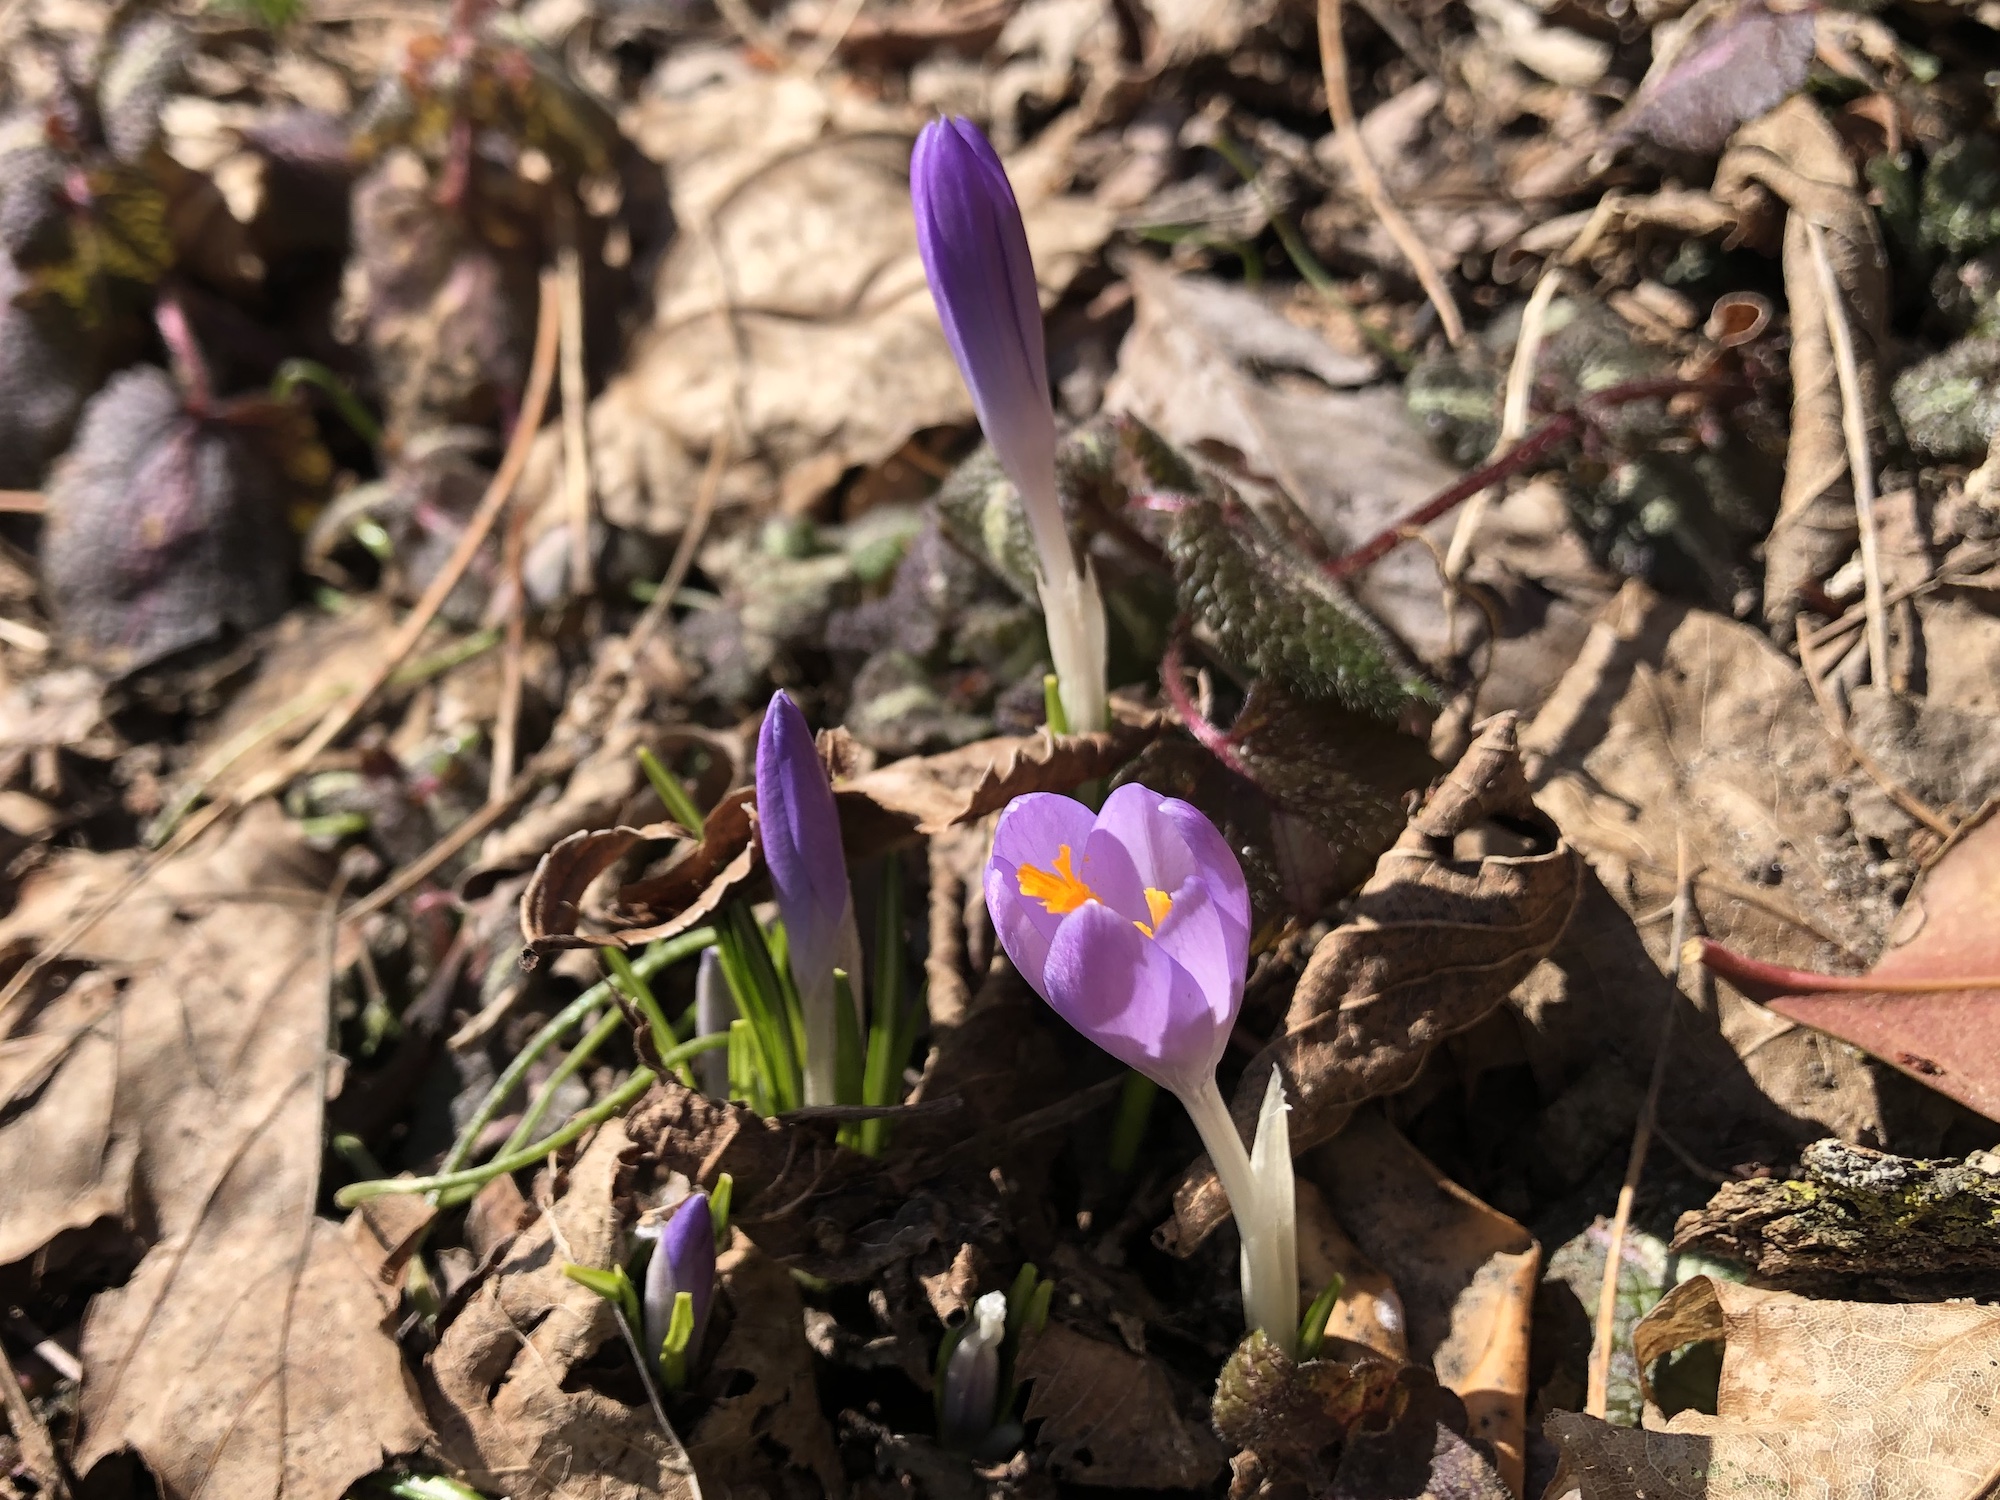 Crocus by Agawa Path in Madison, Wisconsin on March 8, 2023.